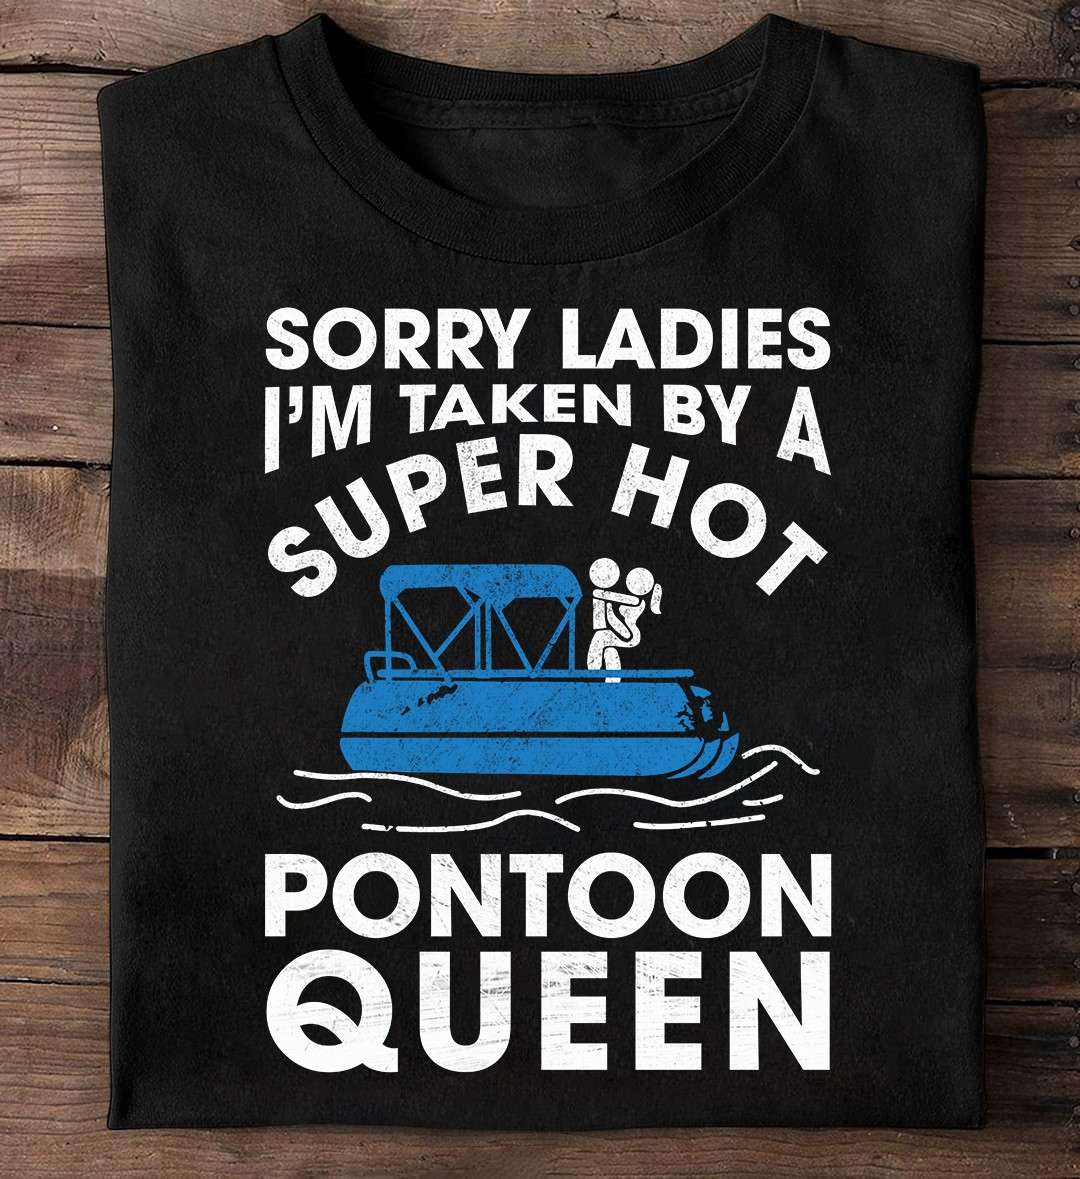 Couple Pontoon - Sorry ladies i'm taken by a super hot pontoon queen